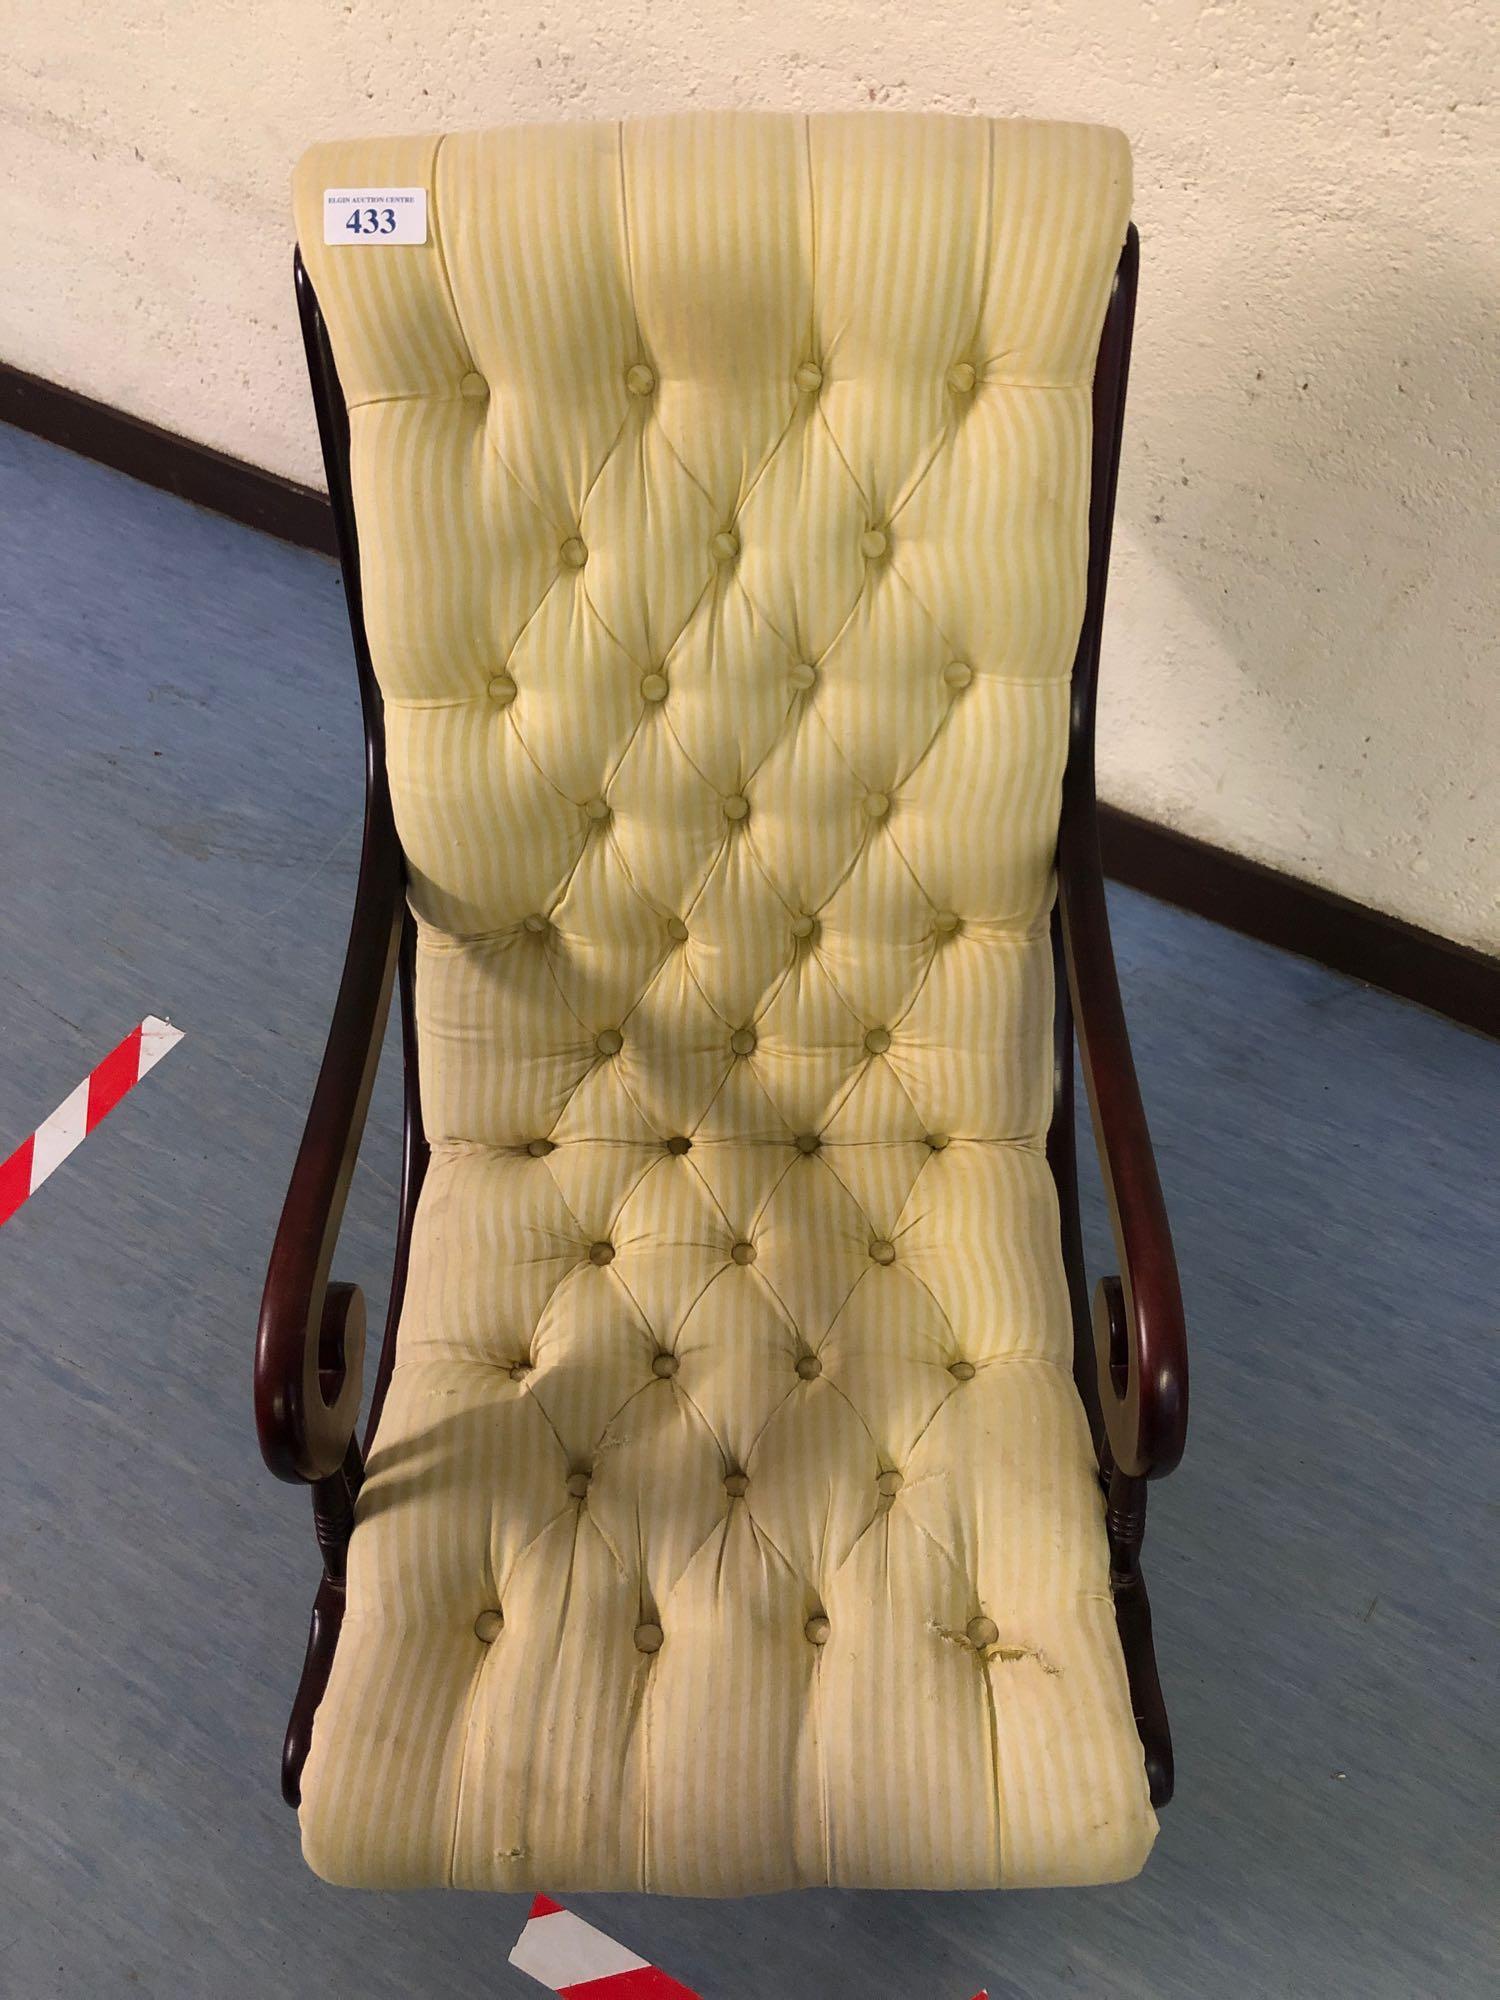 REPRO BEDROOM CHAIR - Image 2 of 4